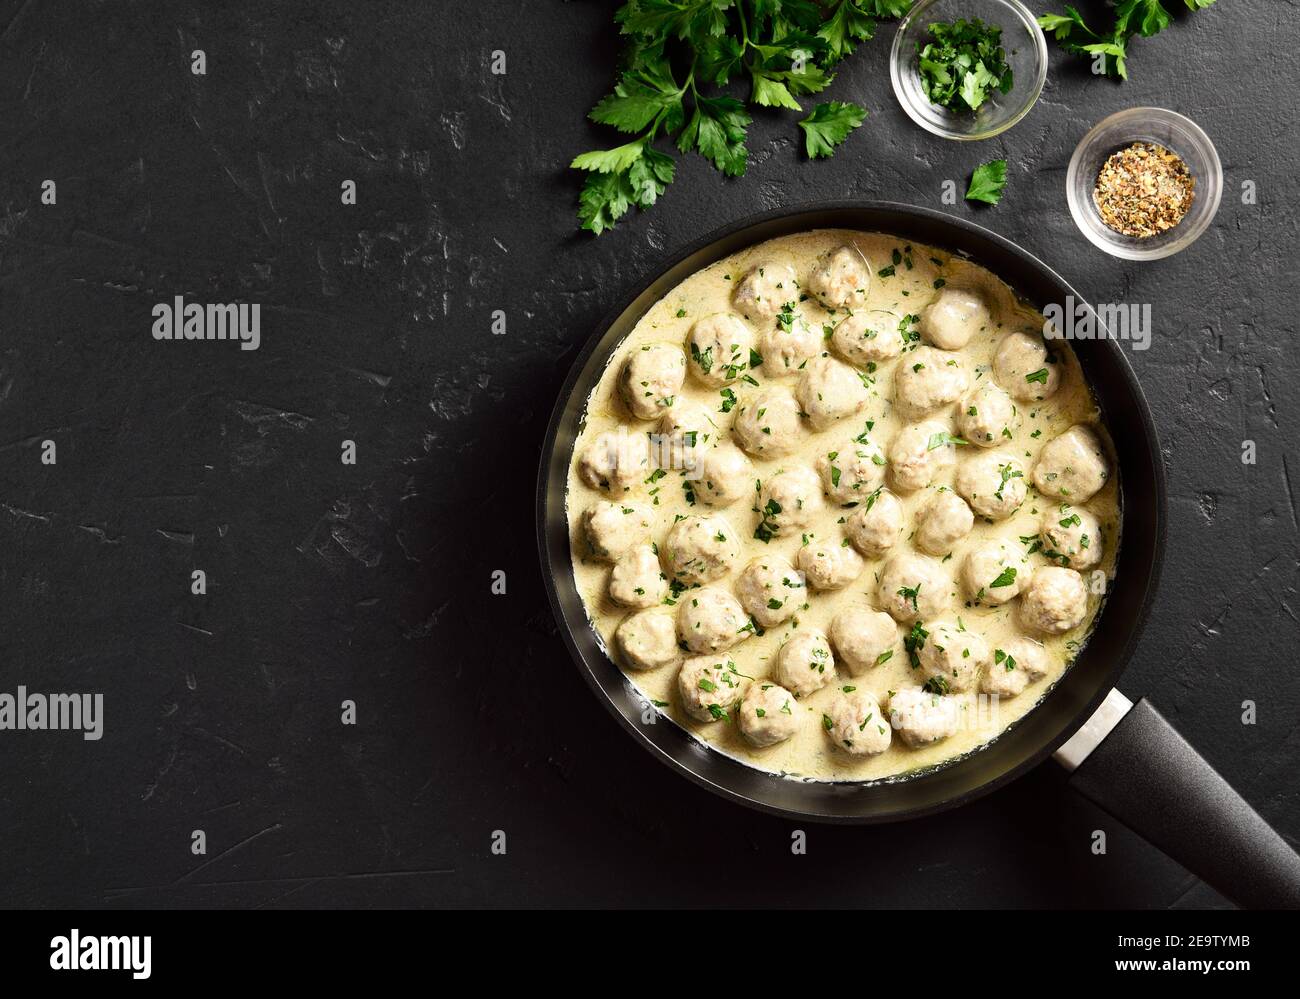 Delicious homemade swedish meatballs with creamy white sauce in frying pan over black stone background with free space. Top view, flat lay, close up Stock Photo